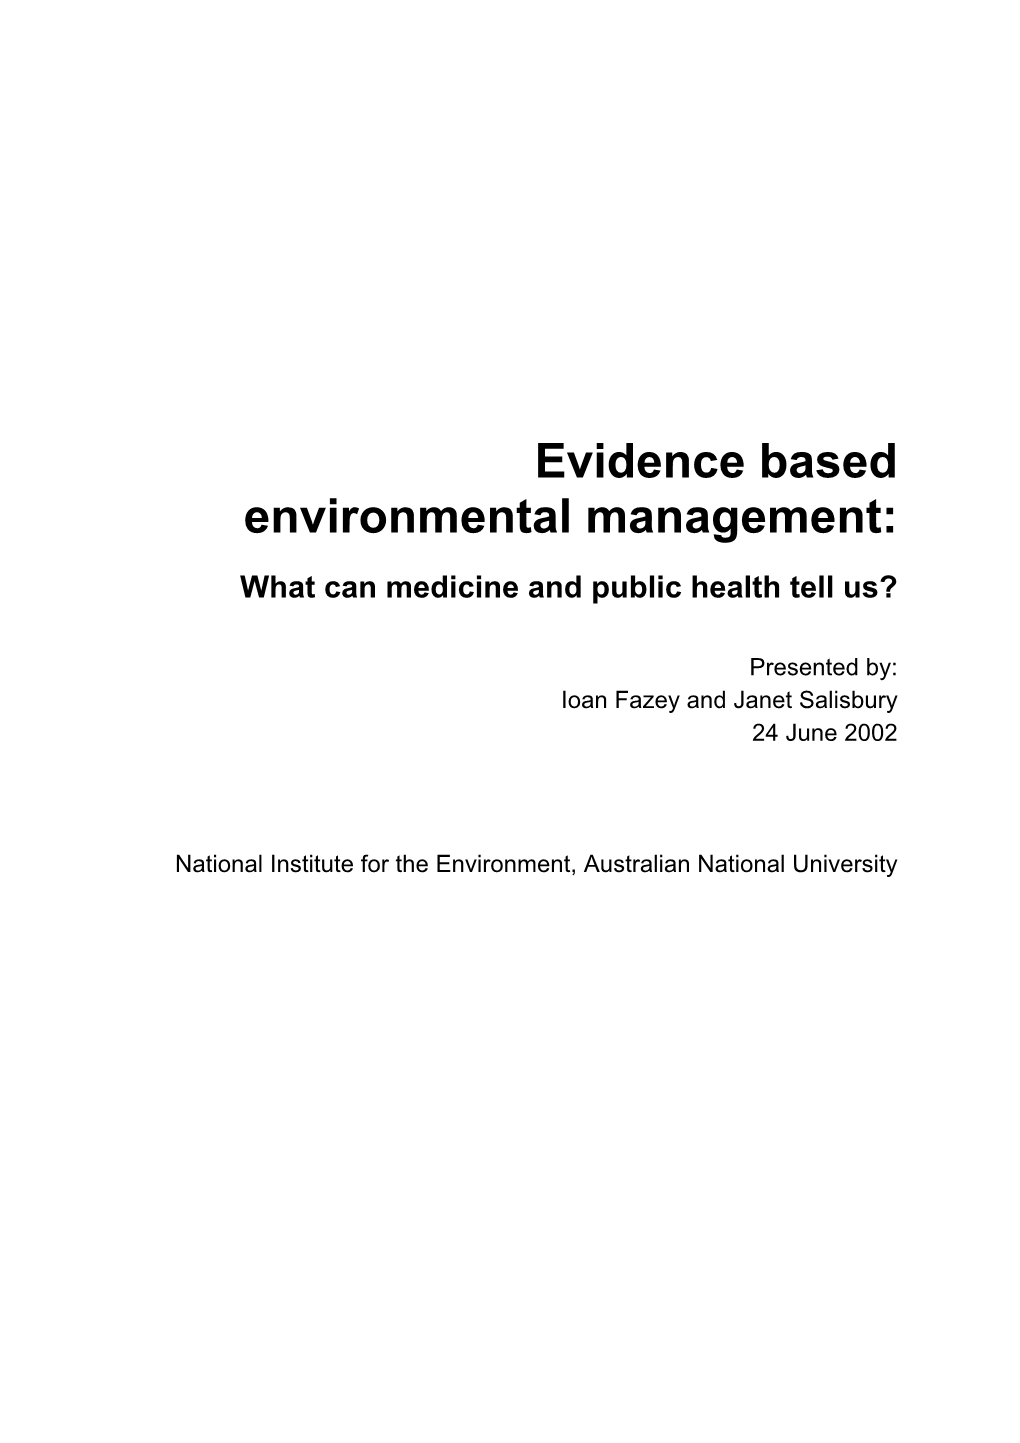 Evidence Based Environmental Management: What Can Medicine and Public Health Tell Us?